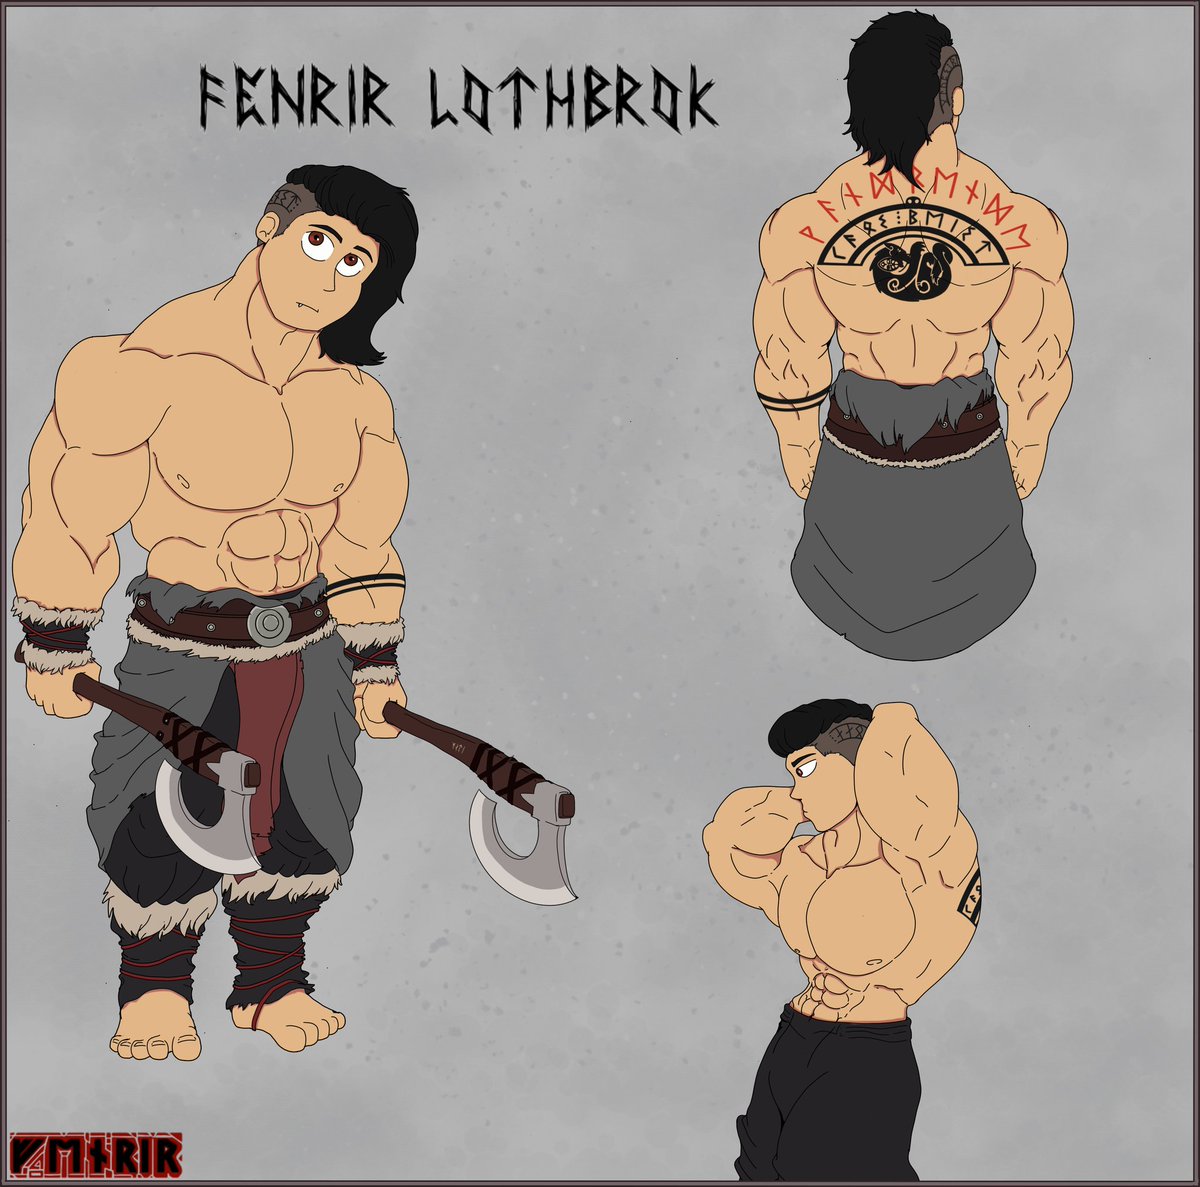 A reference to how Fenrir used to look when he still lived in the middle ages and was a warrior Ulfhedinn 

#medieval #medievalfantasy #referencesheet #reference #OC #medievaloc #viking #vikingOC